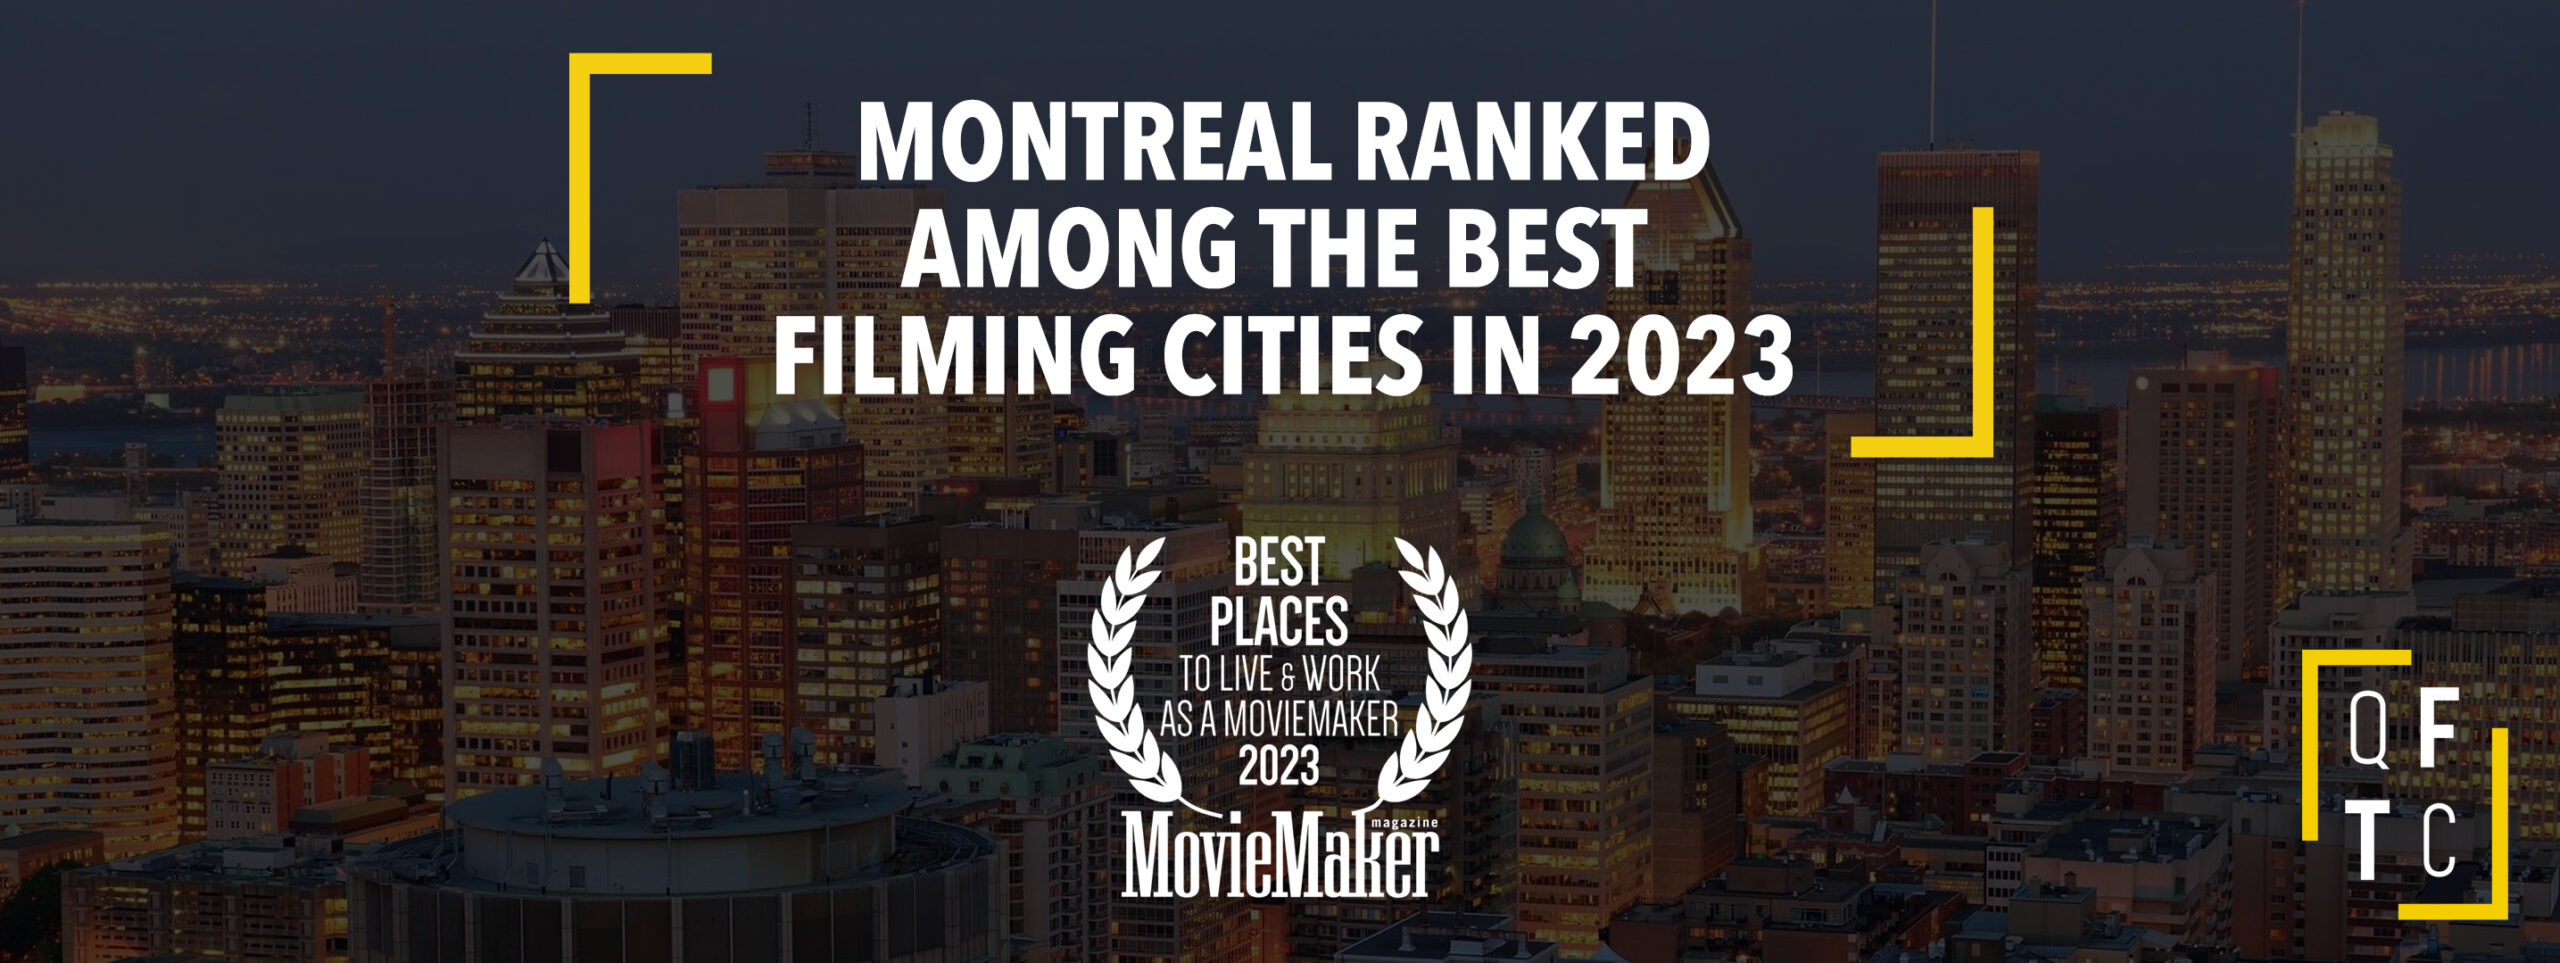 MONTREAL STILL RANKED AMONG THE BEST FILMING CITIES IN 2023 Bureau du